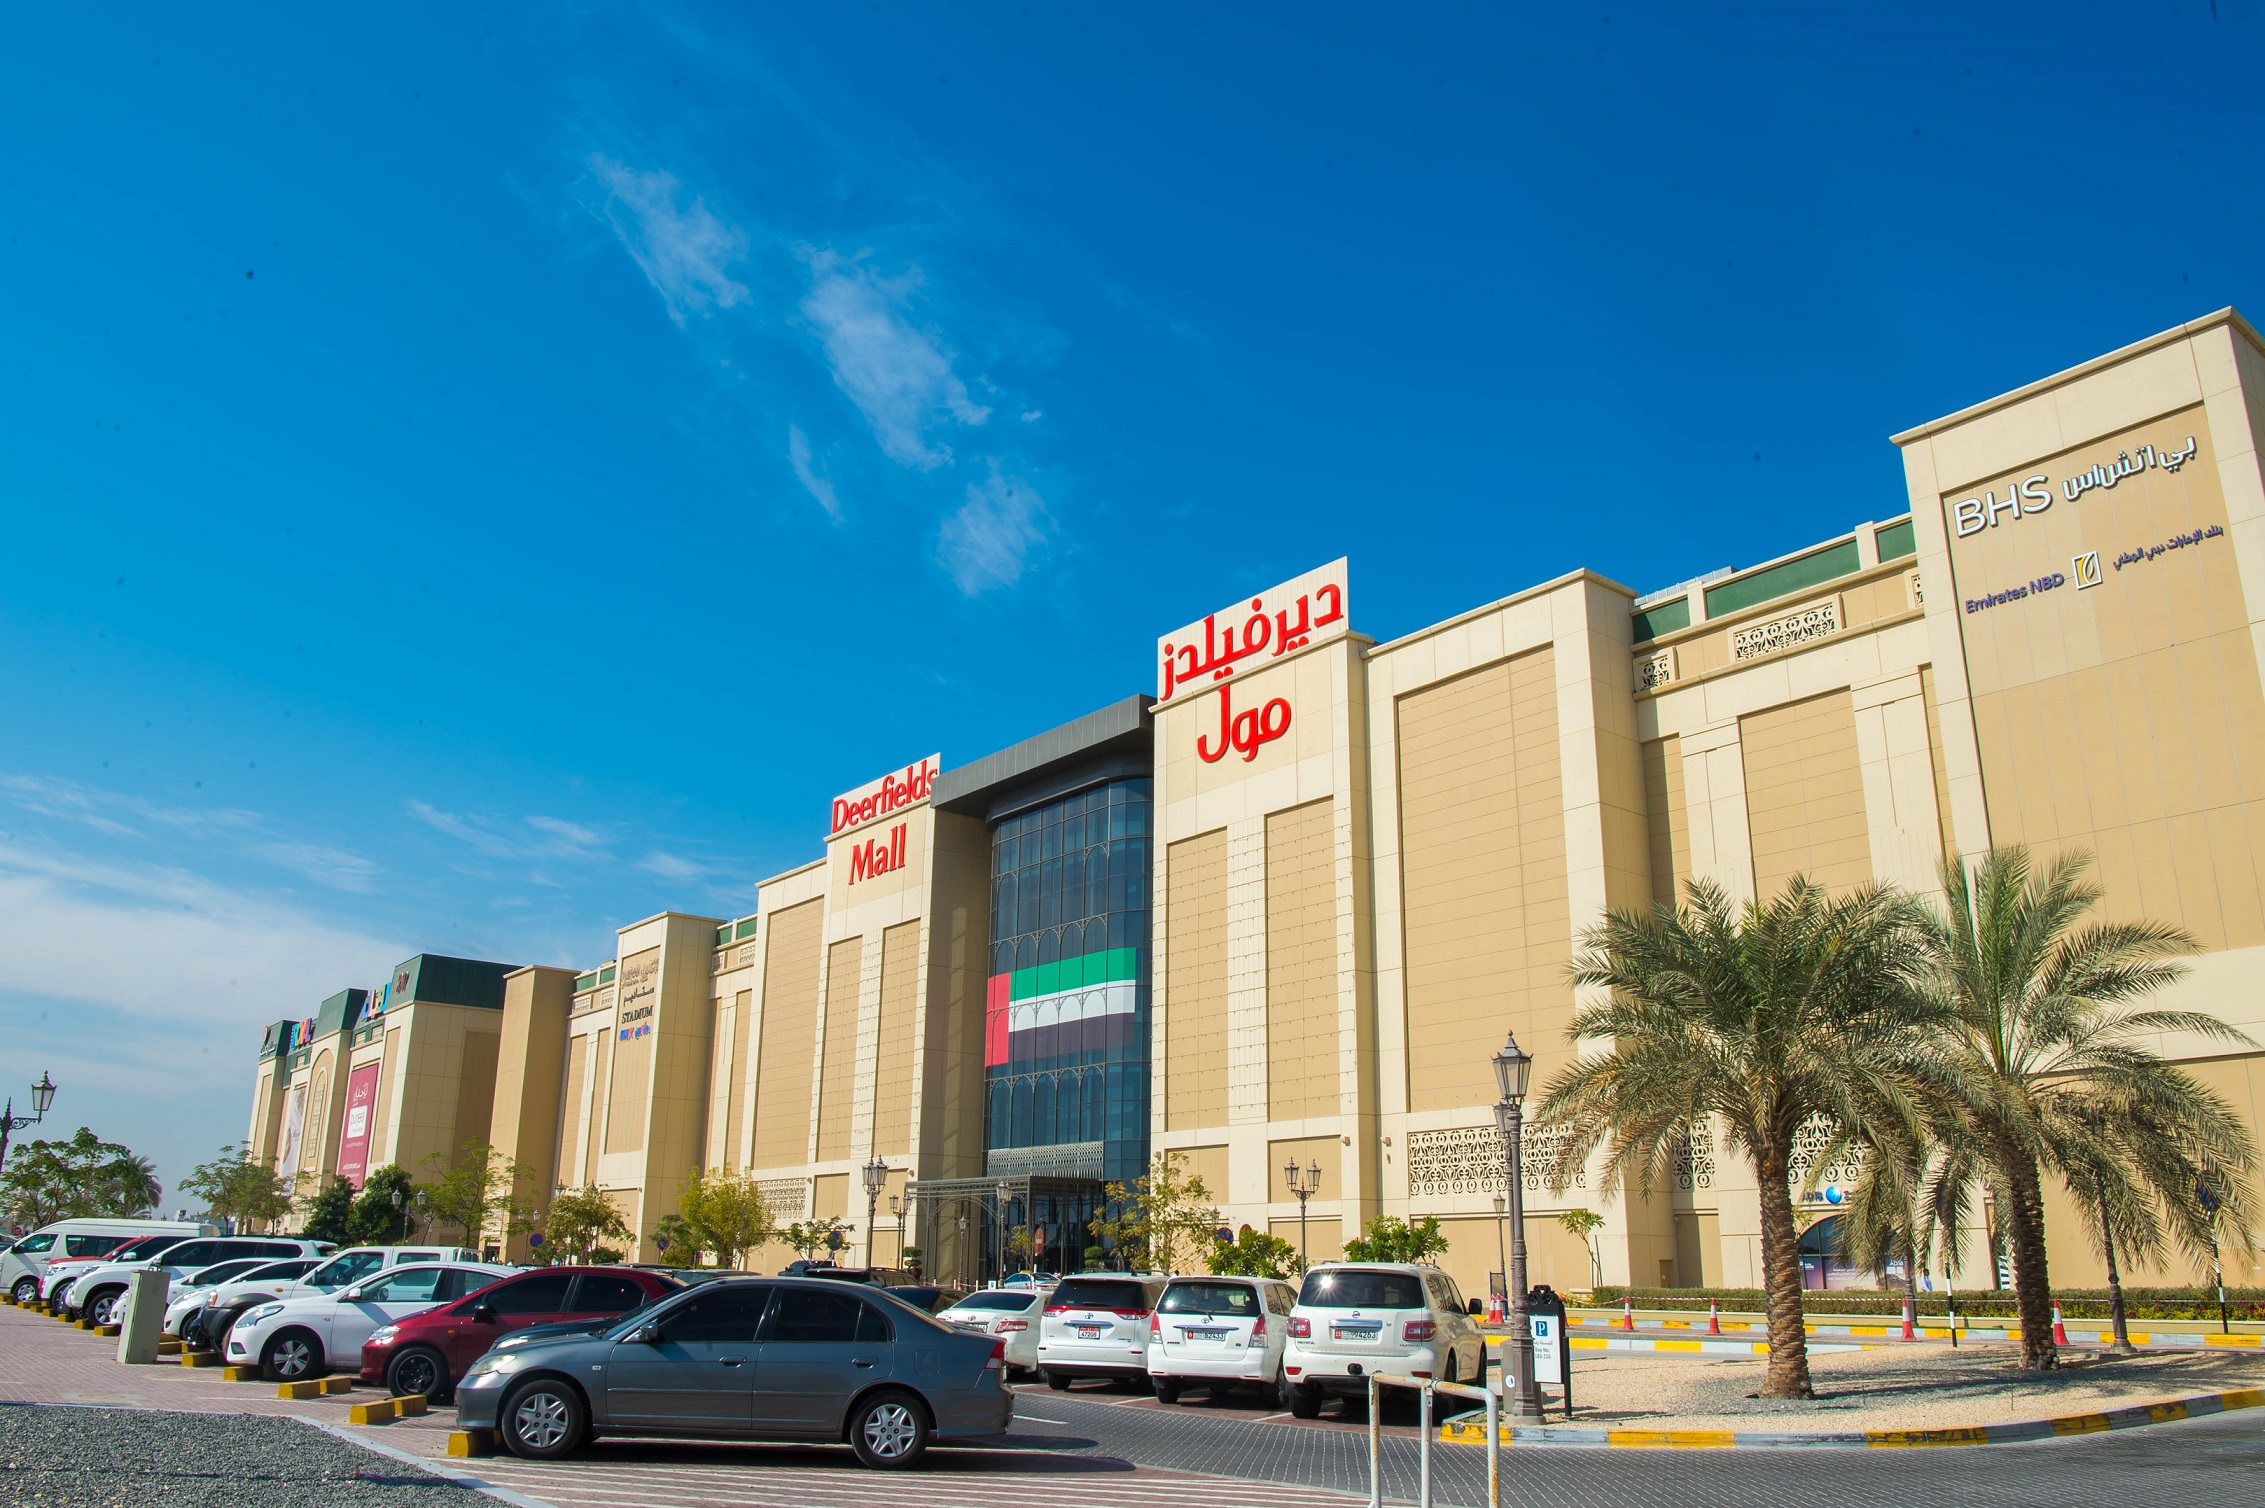 Deerfields Mall Reveals ‘Ahlan Eid’ with a chance to win Gold To Celebrate Eid Al Adha